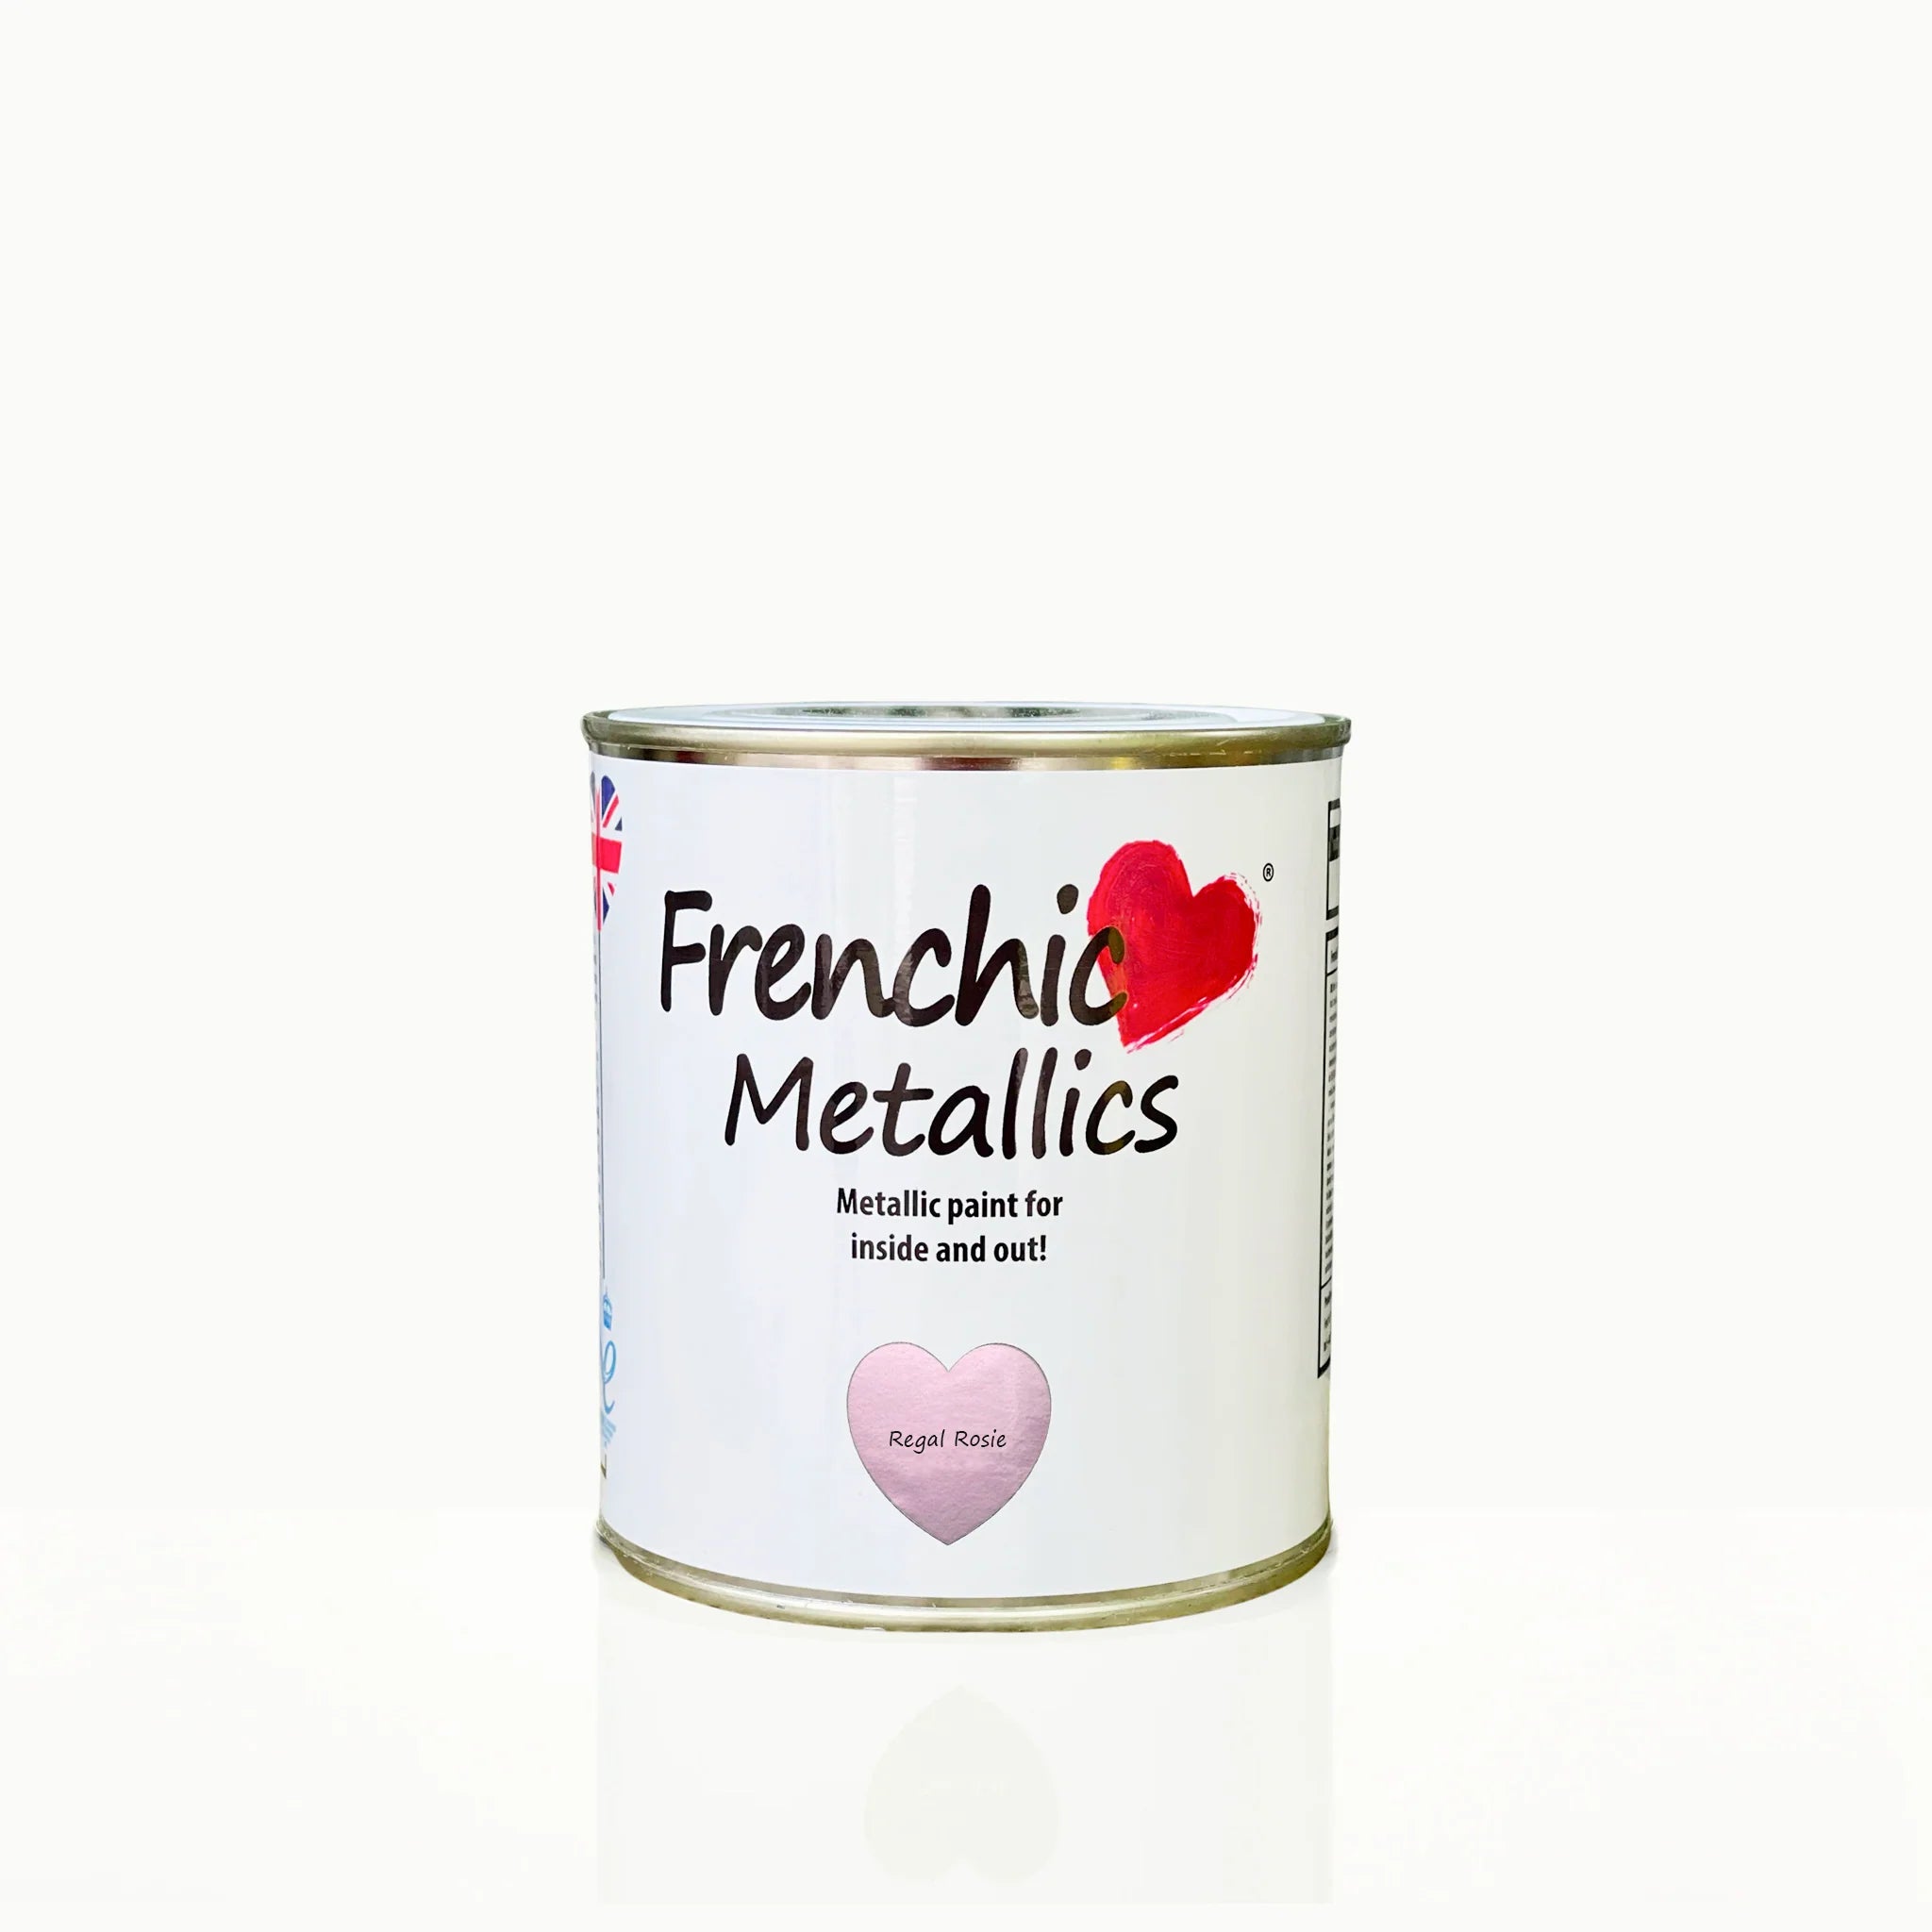 Frenchic Paint | Regal Rosie Metallics Limited Edition by Weirs of Baggot Street